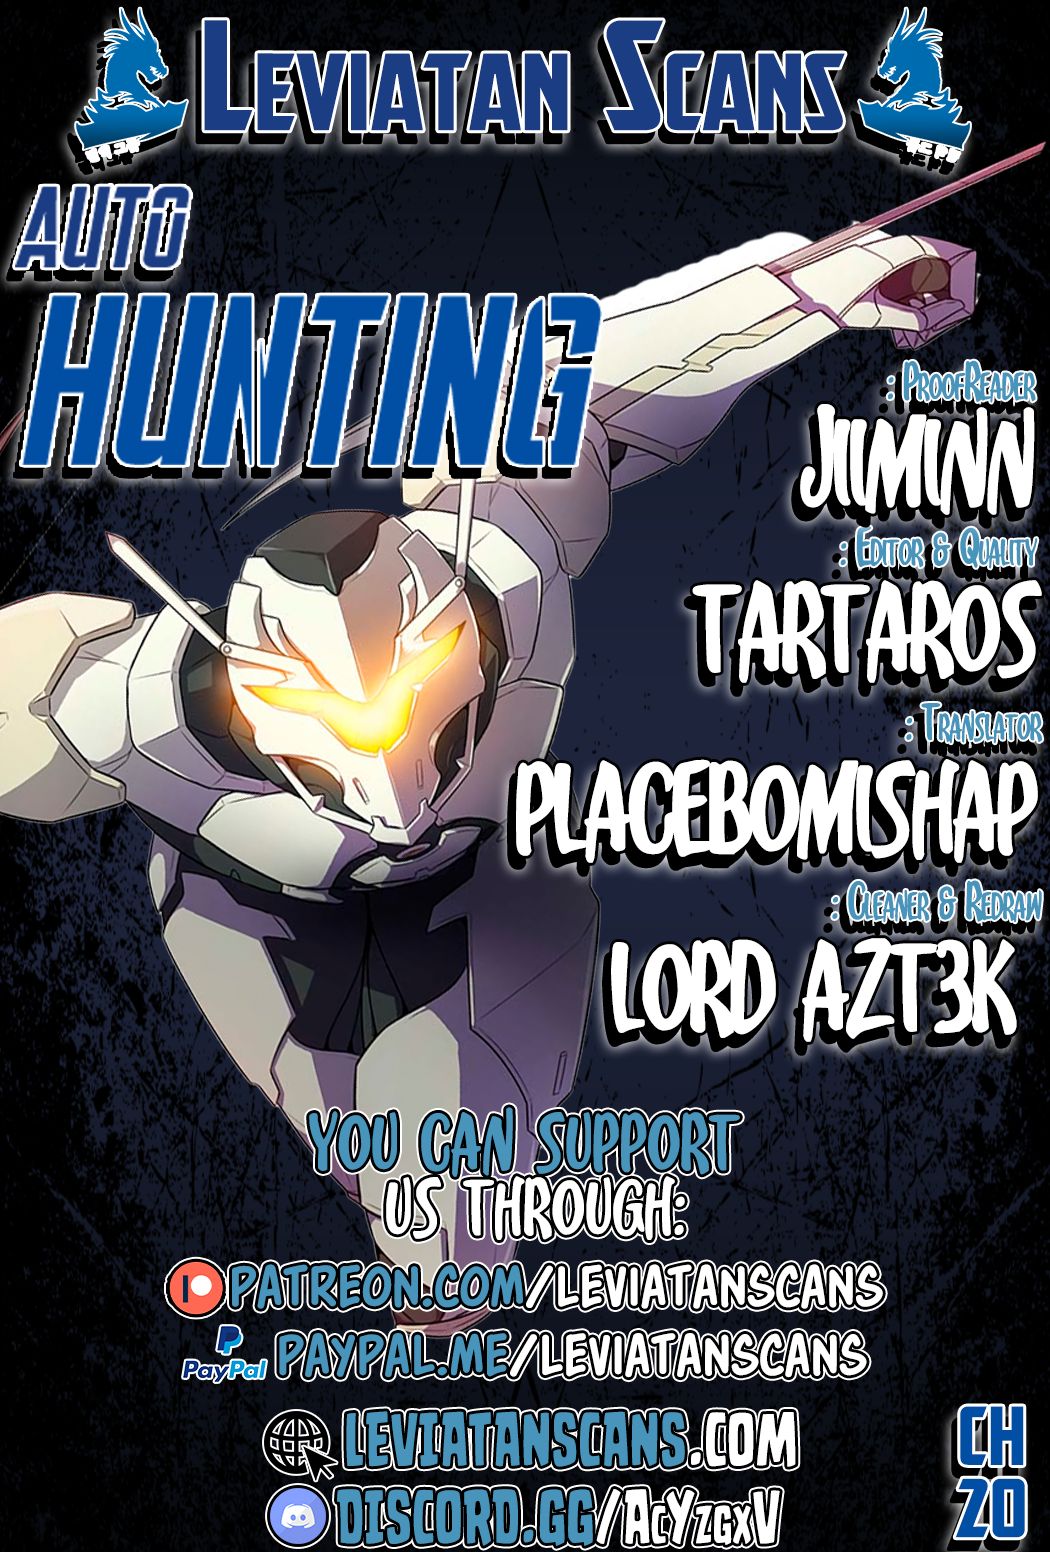 Auto Hunting Chapter 20